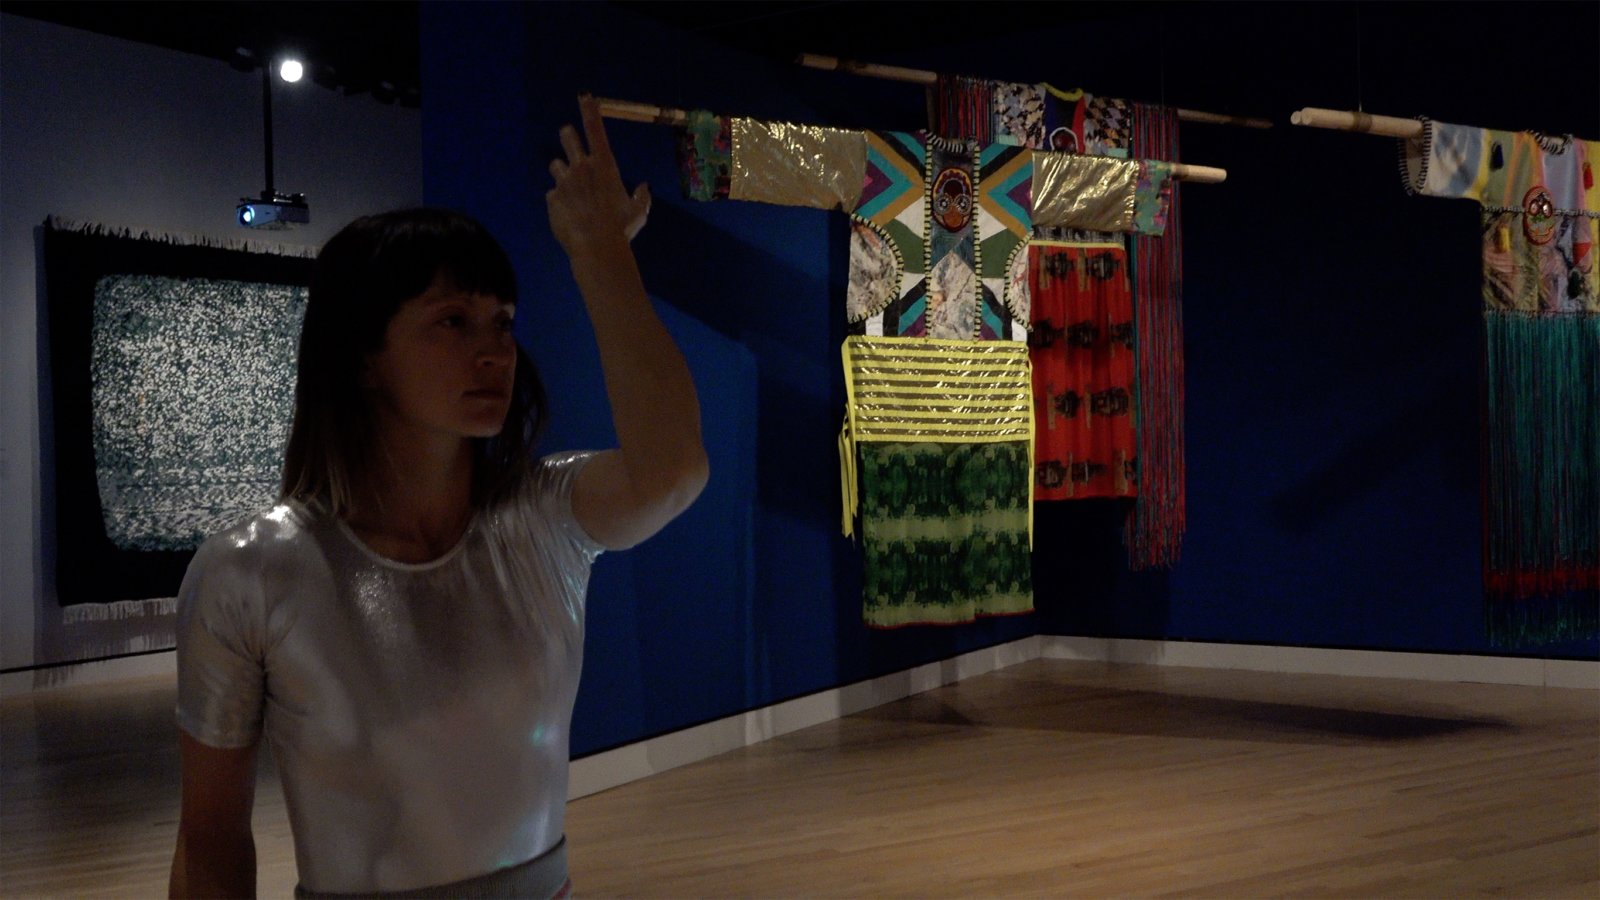 Tanya Lukin Linklater, Untitled (for Sonya Kelliher-Combs), 2018, site-specific performance, plinth, dimensions variable. Performance documentation, Art for a New Understanding, Native Art 1950s to Now, Crystal Bridges Museum of American Art, Bentonville, USA, 2018